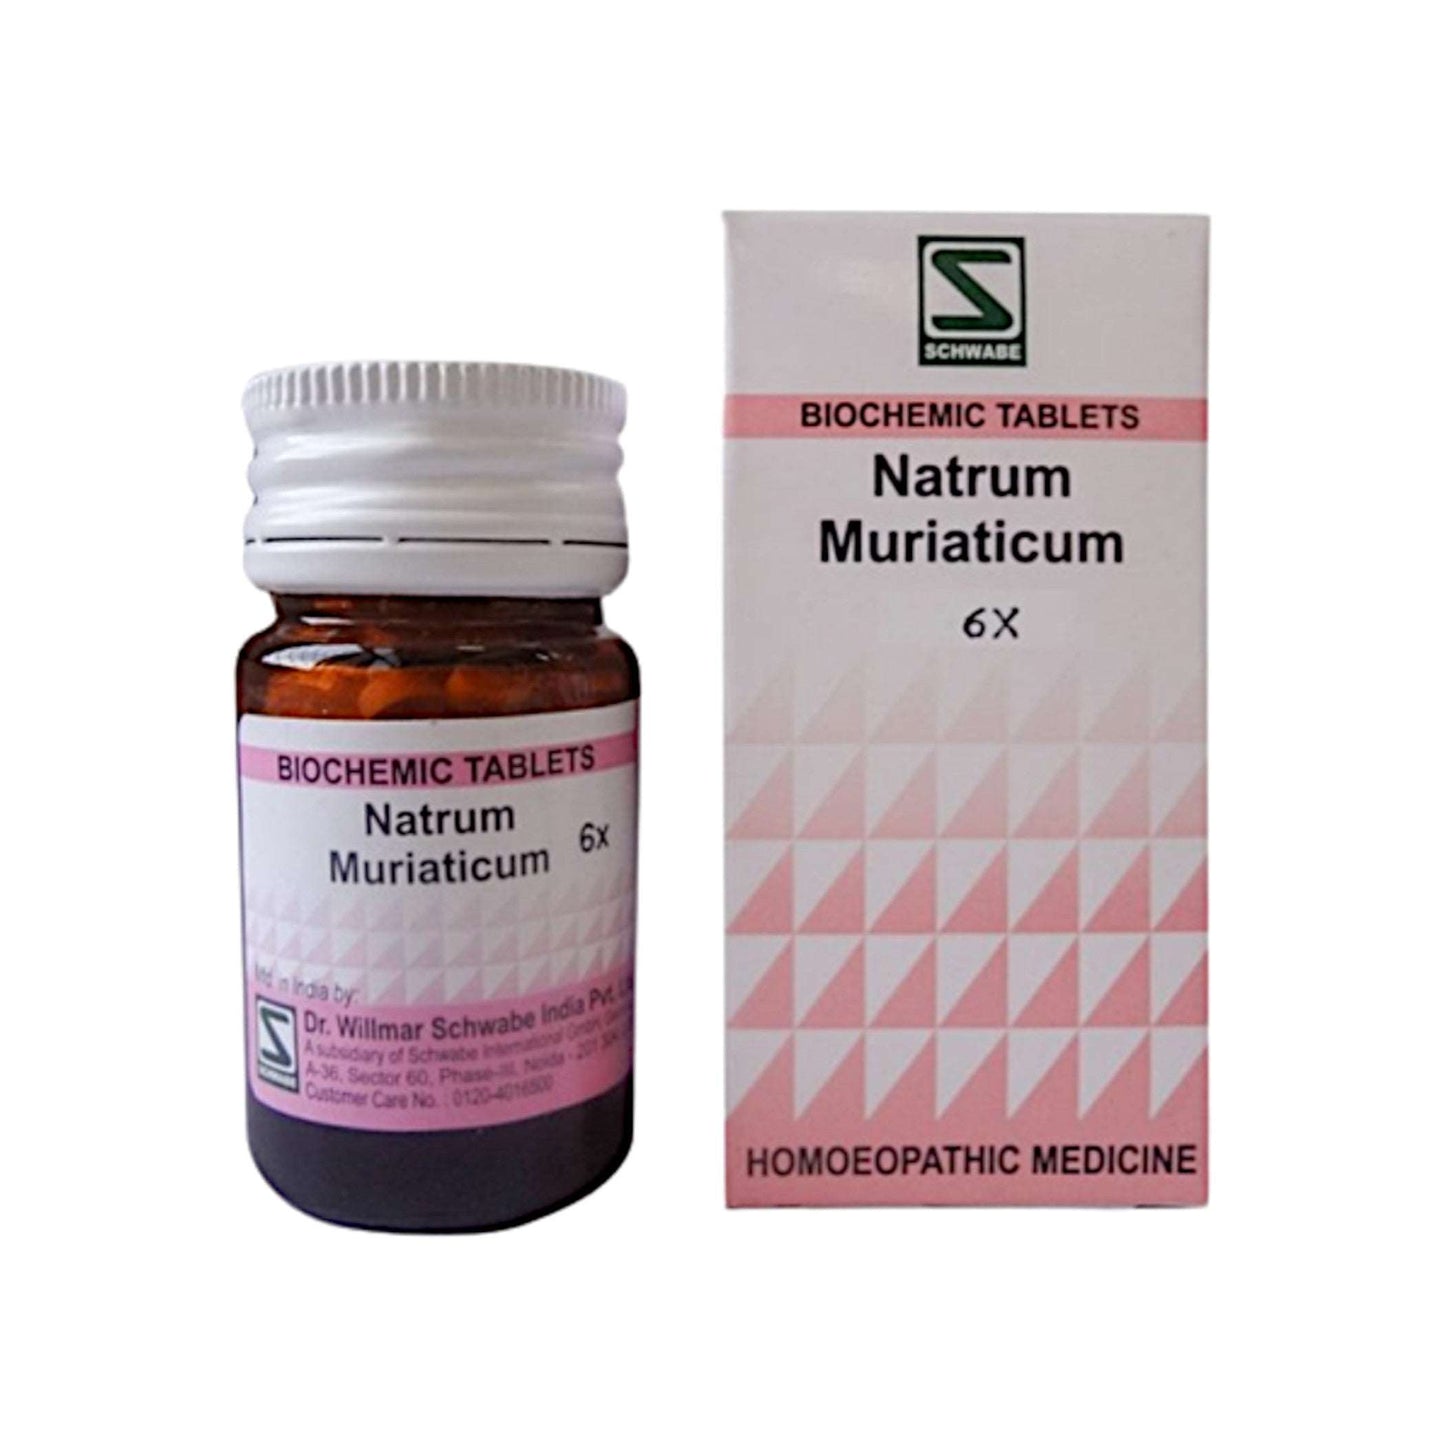 Image: Dr. Schwabe Homeopathy Natrium Muriaticum 6x Tablets 20 g - A remedy for fluid balance, emotions, and skin health.